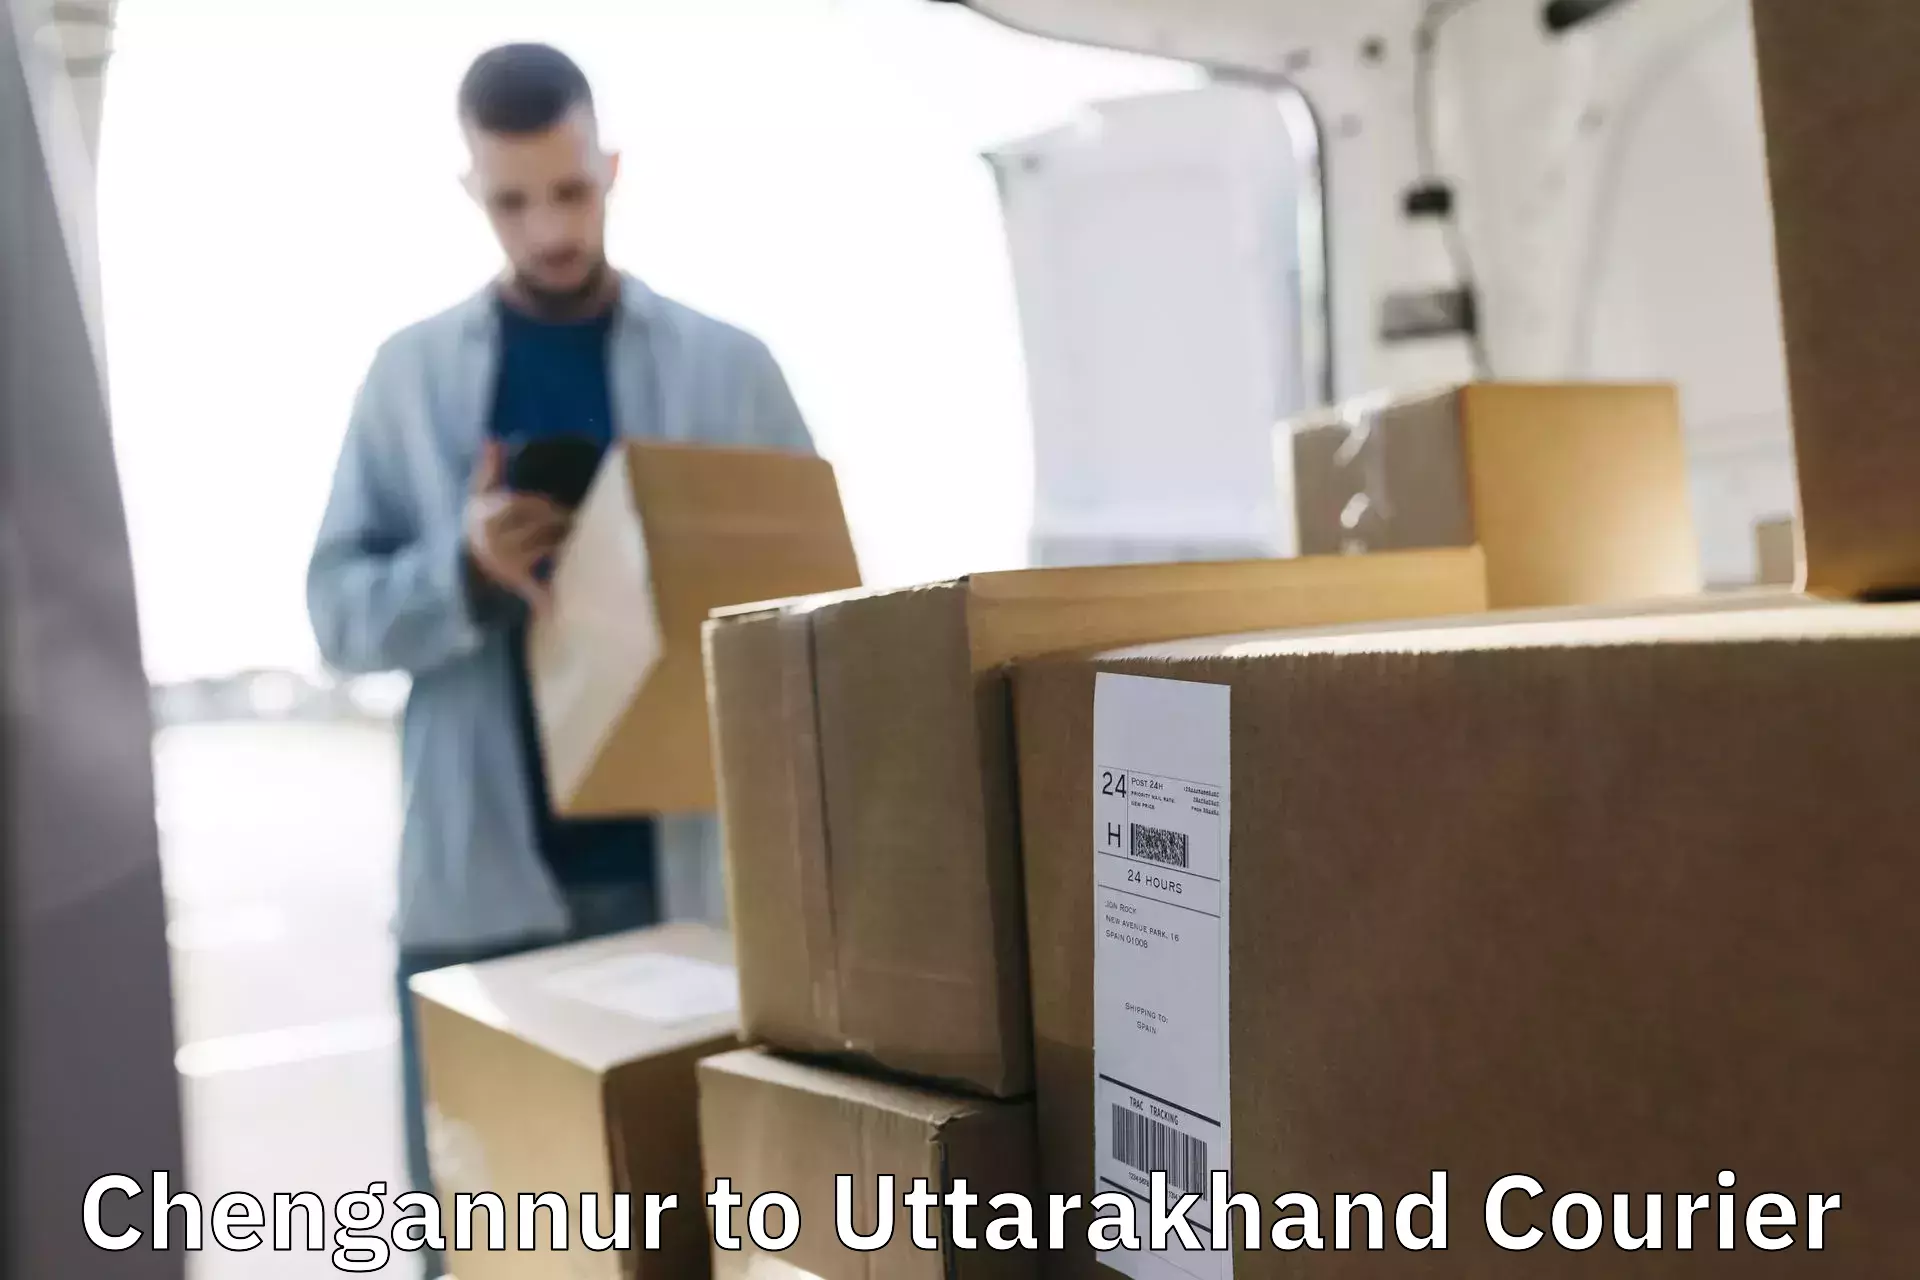 Subscription-based courier Chengannur to Tehri